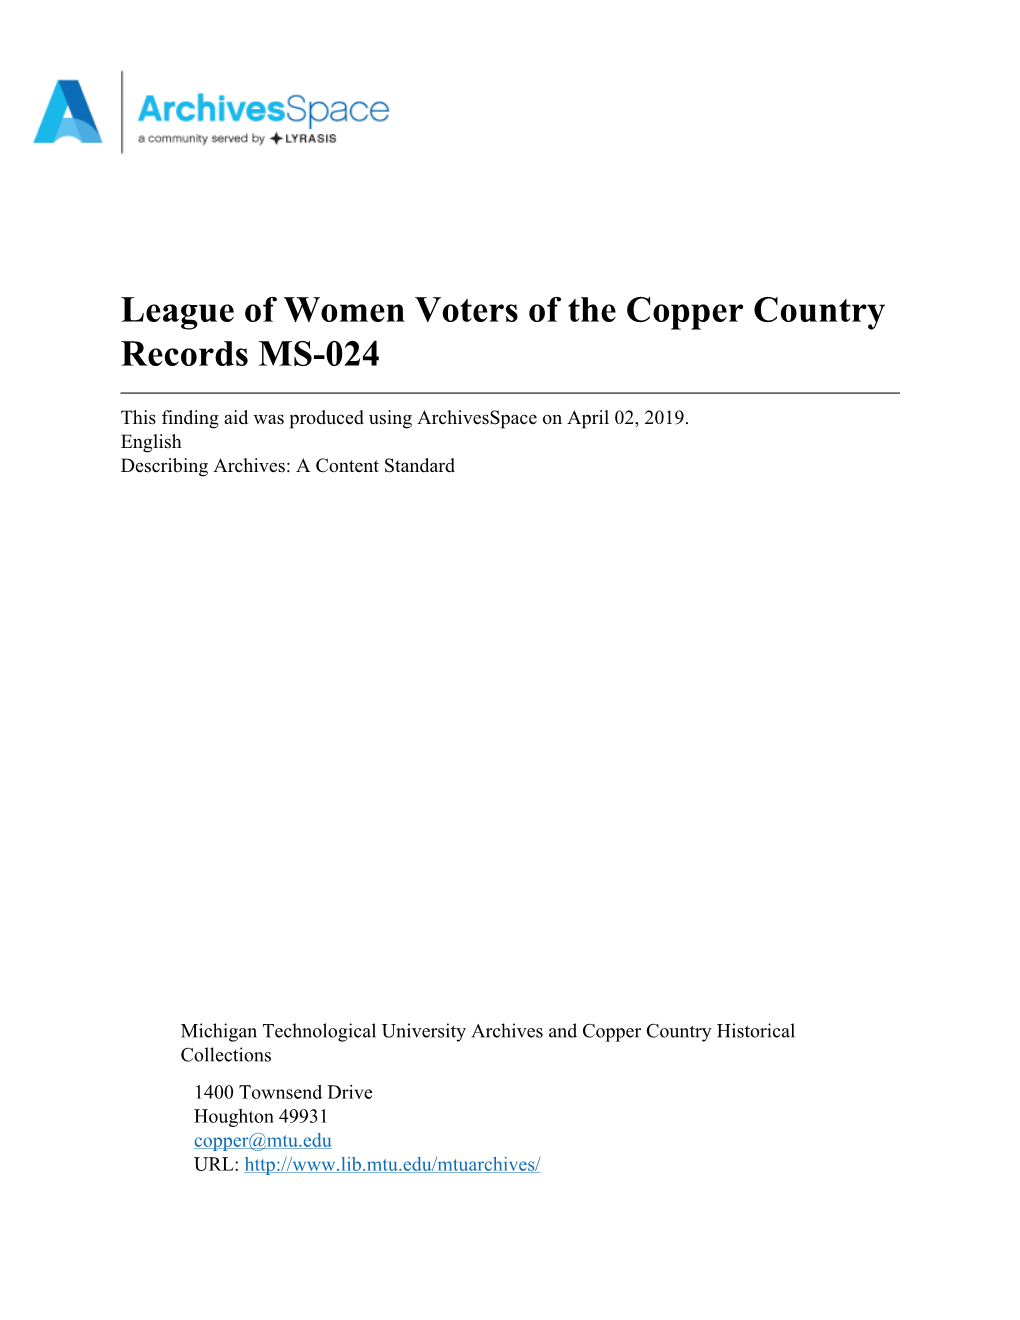 League of Women's Voters of the Copper Country Records